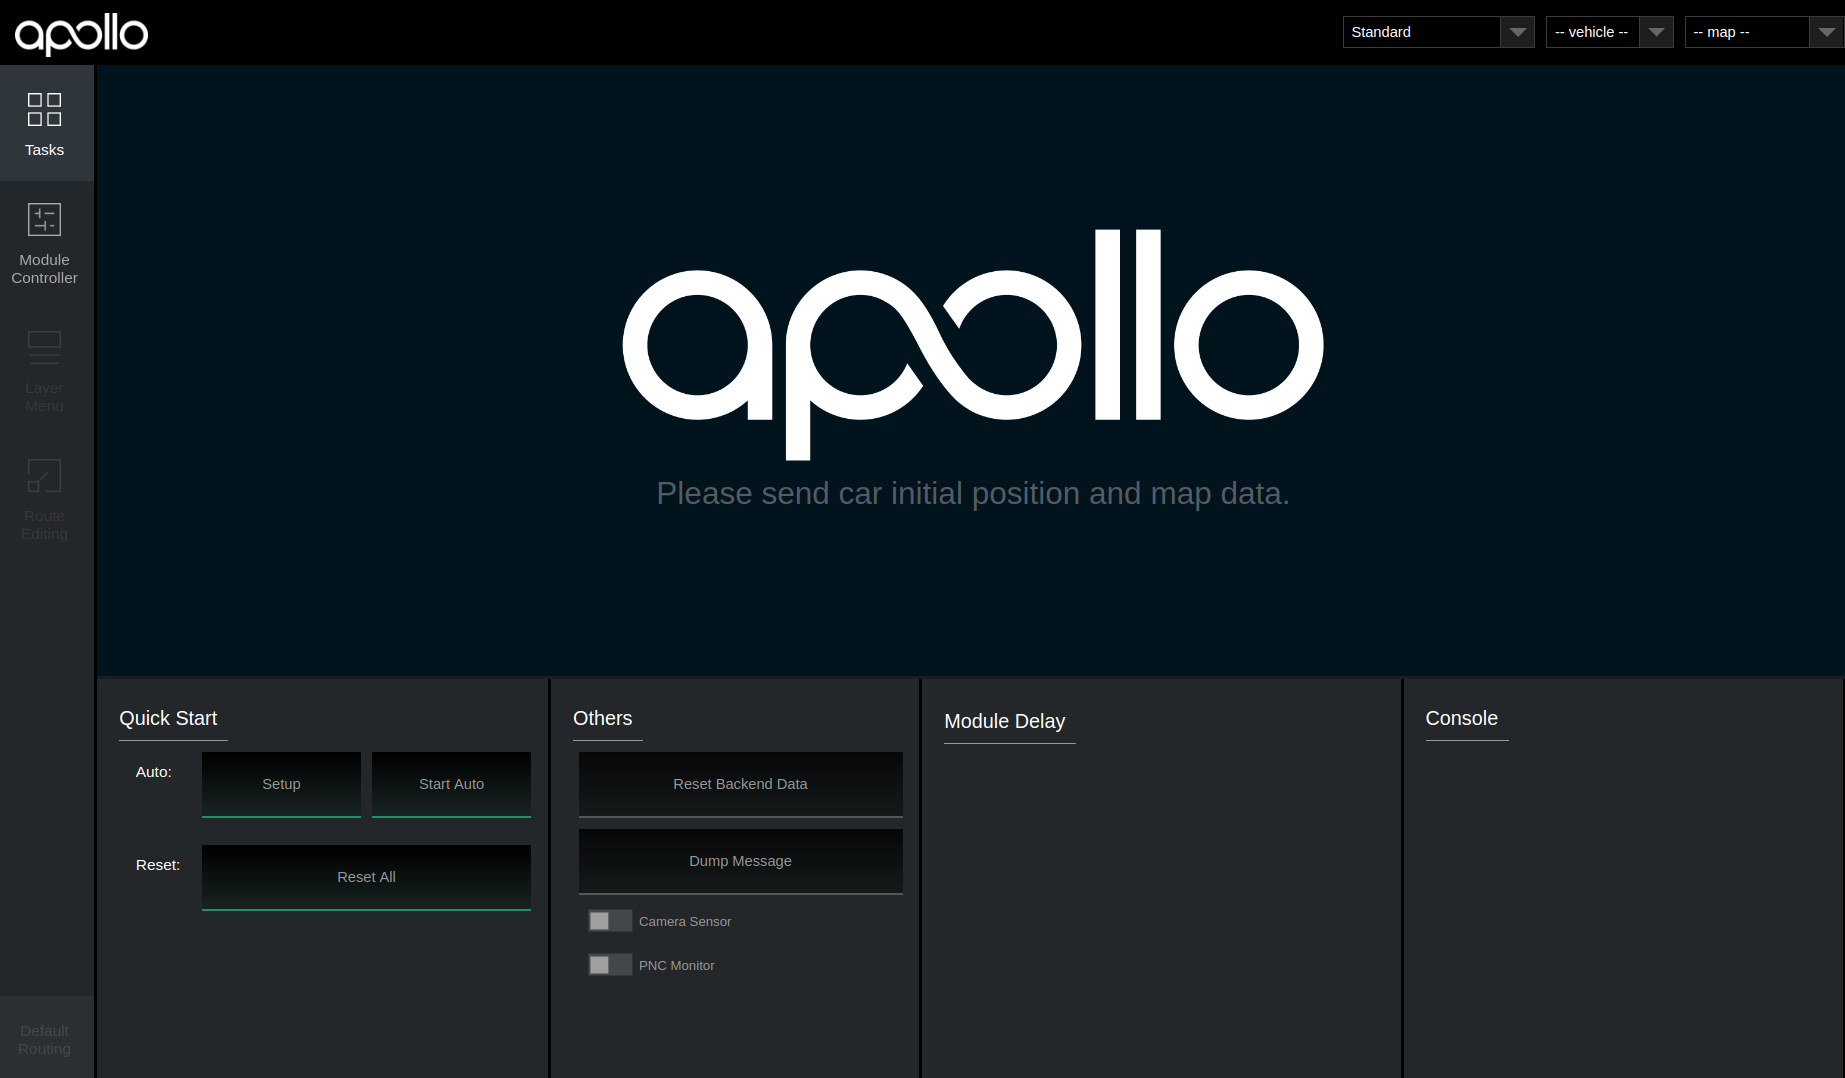 docs/demo_guide/images/apollo_bootstrap_screen.png